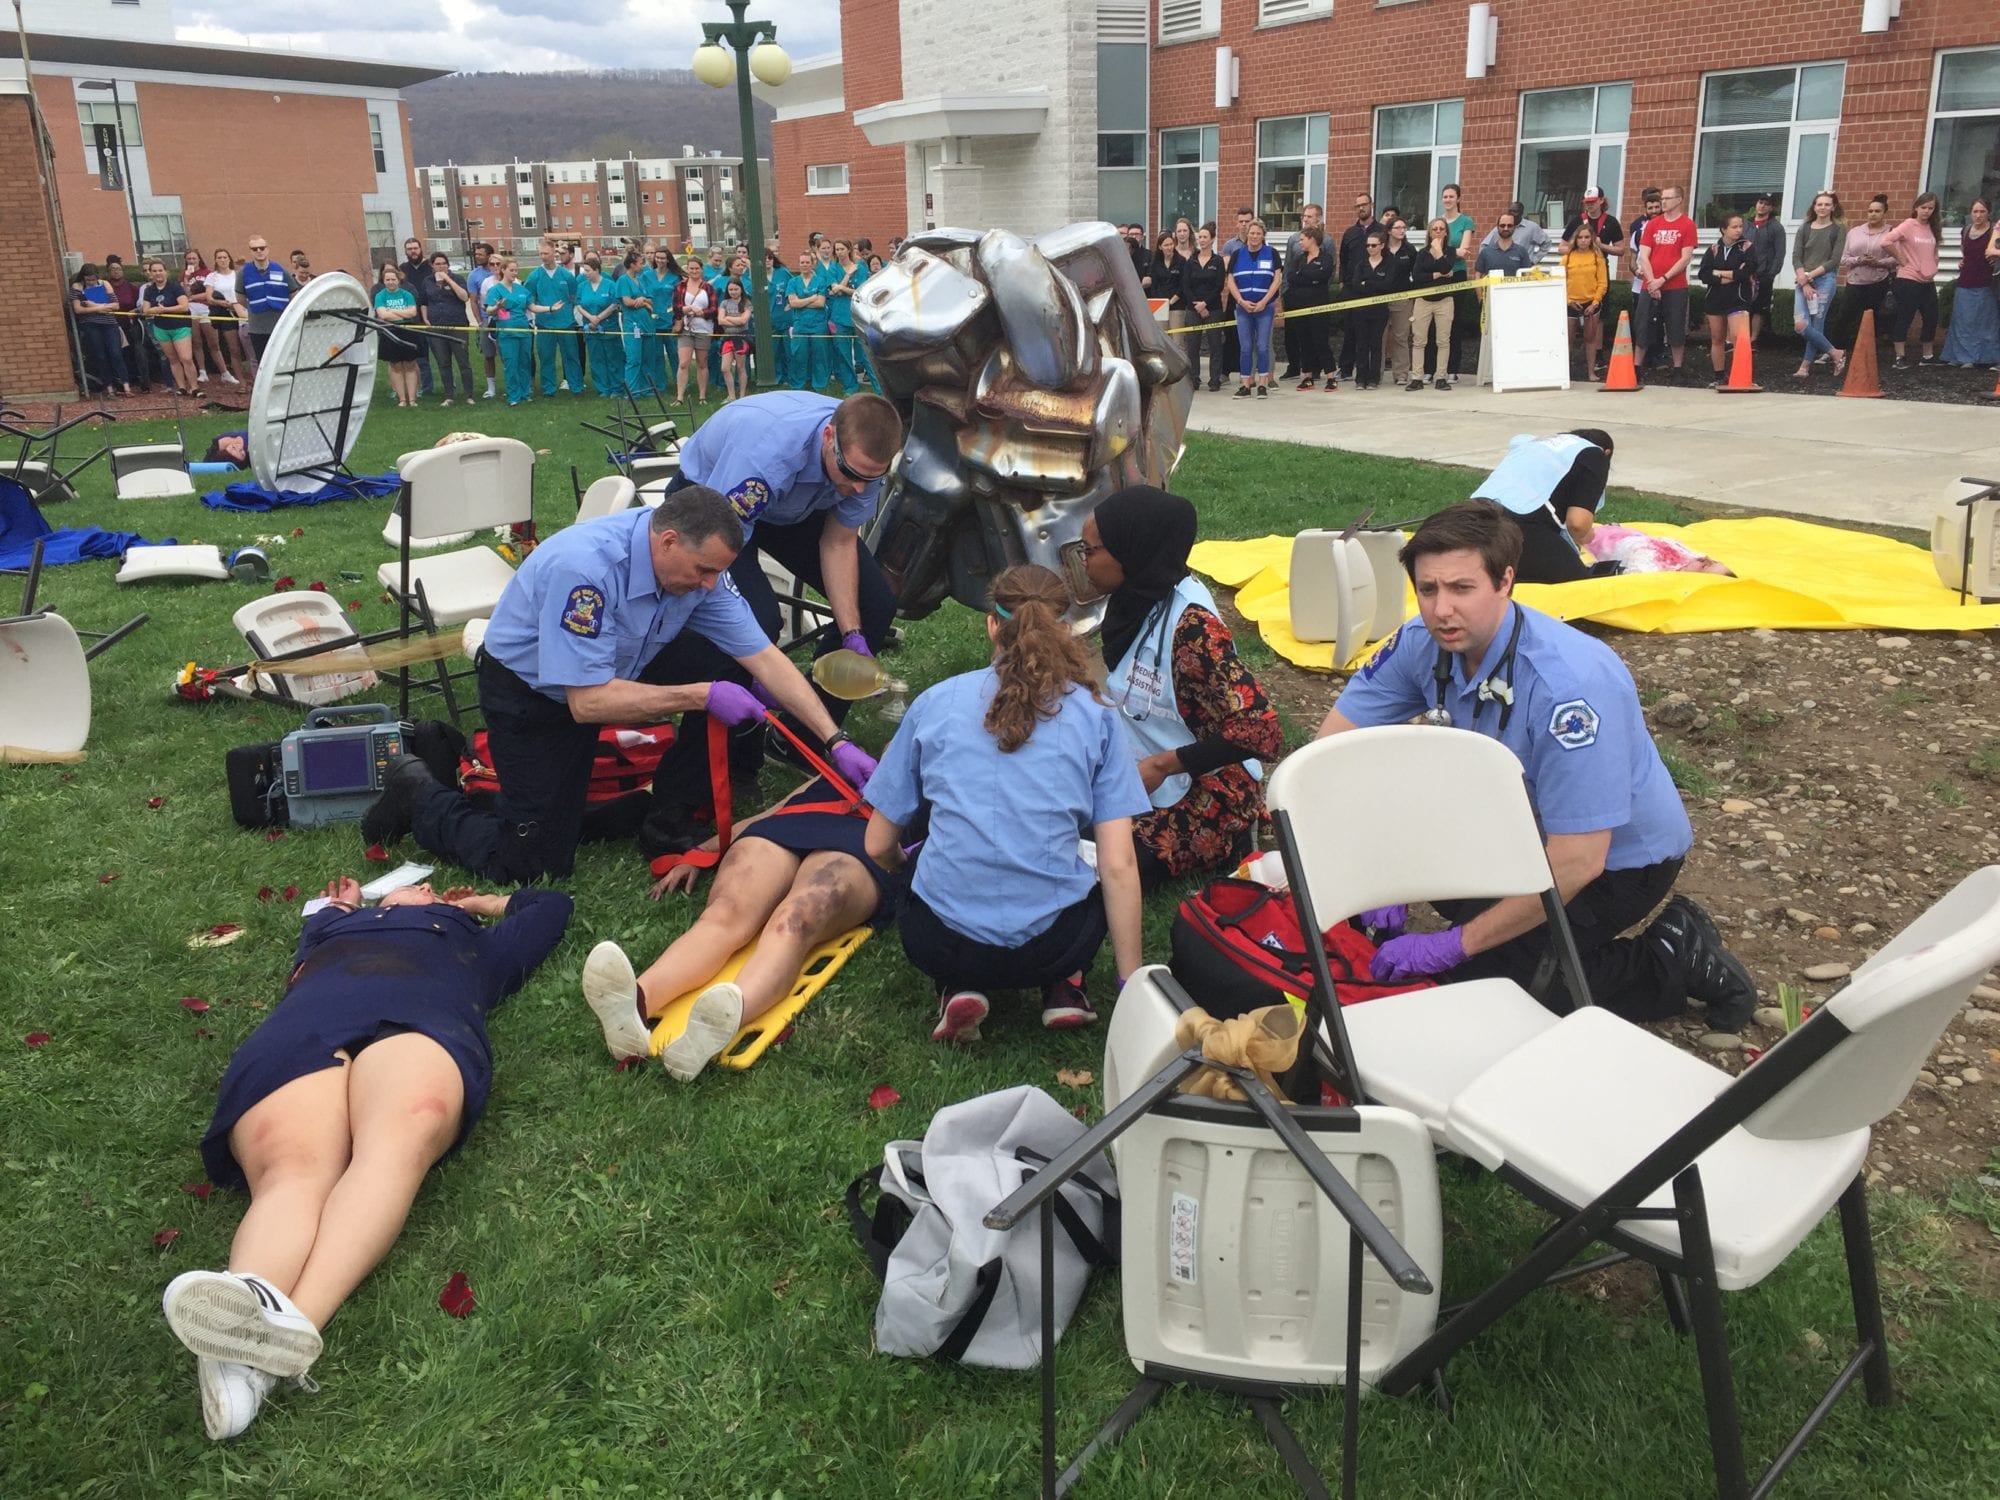 From Mock Wedding to Mock Disaster: 2018 drill puts student skills to the ultimate test